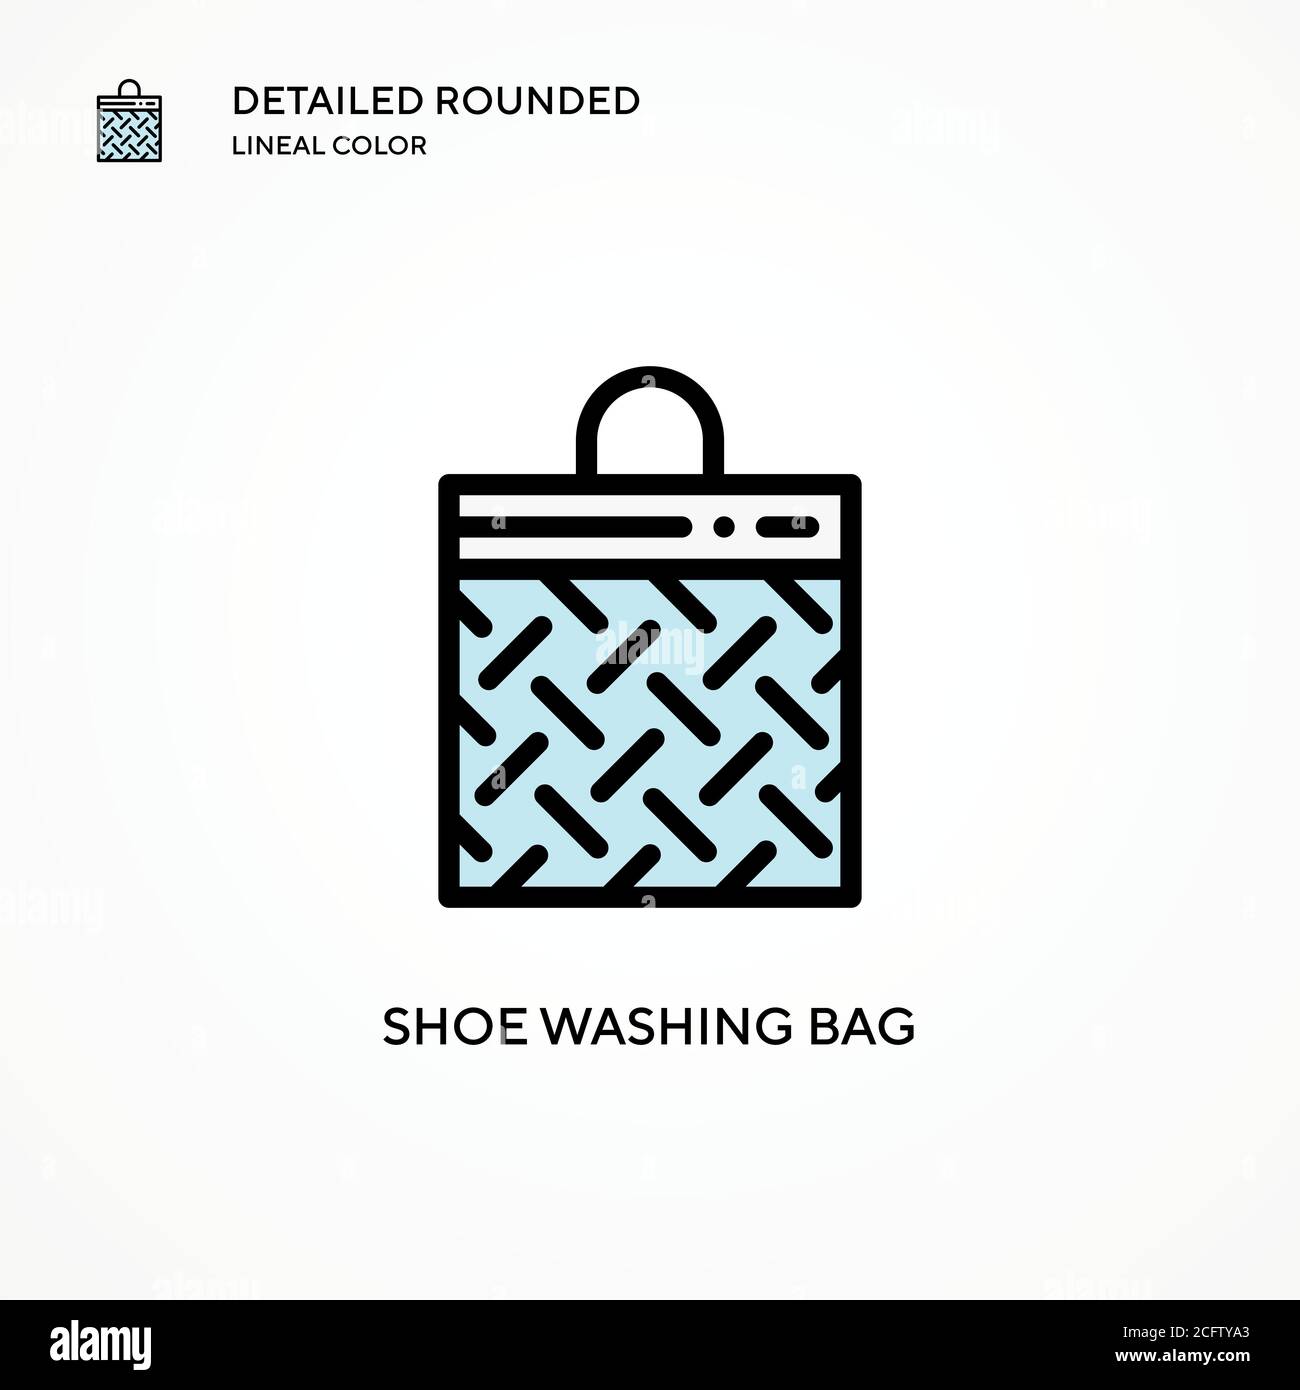 Shoe washing bag vector icon. Modern vector illustration concepts. Easy to edit and customize. Stock Vector